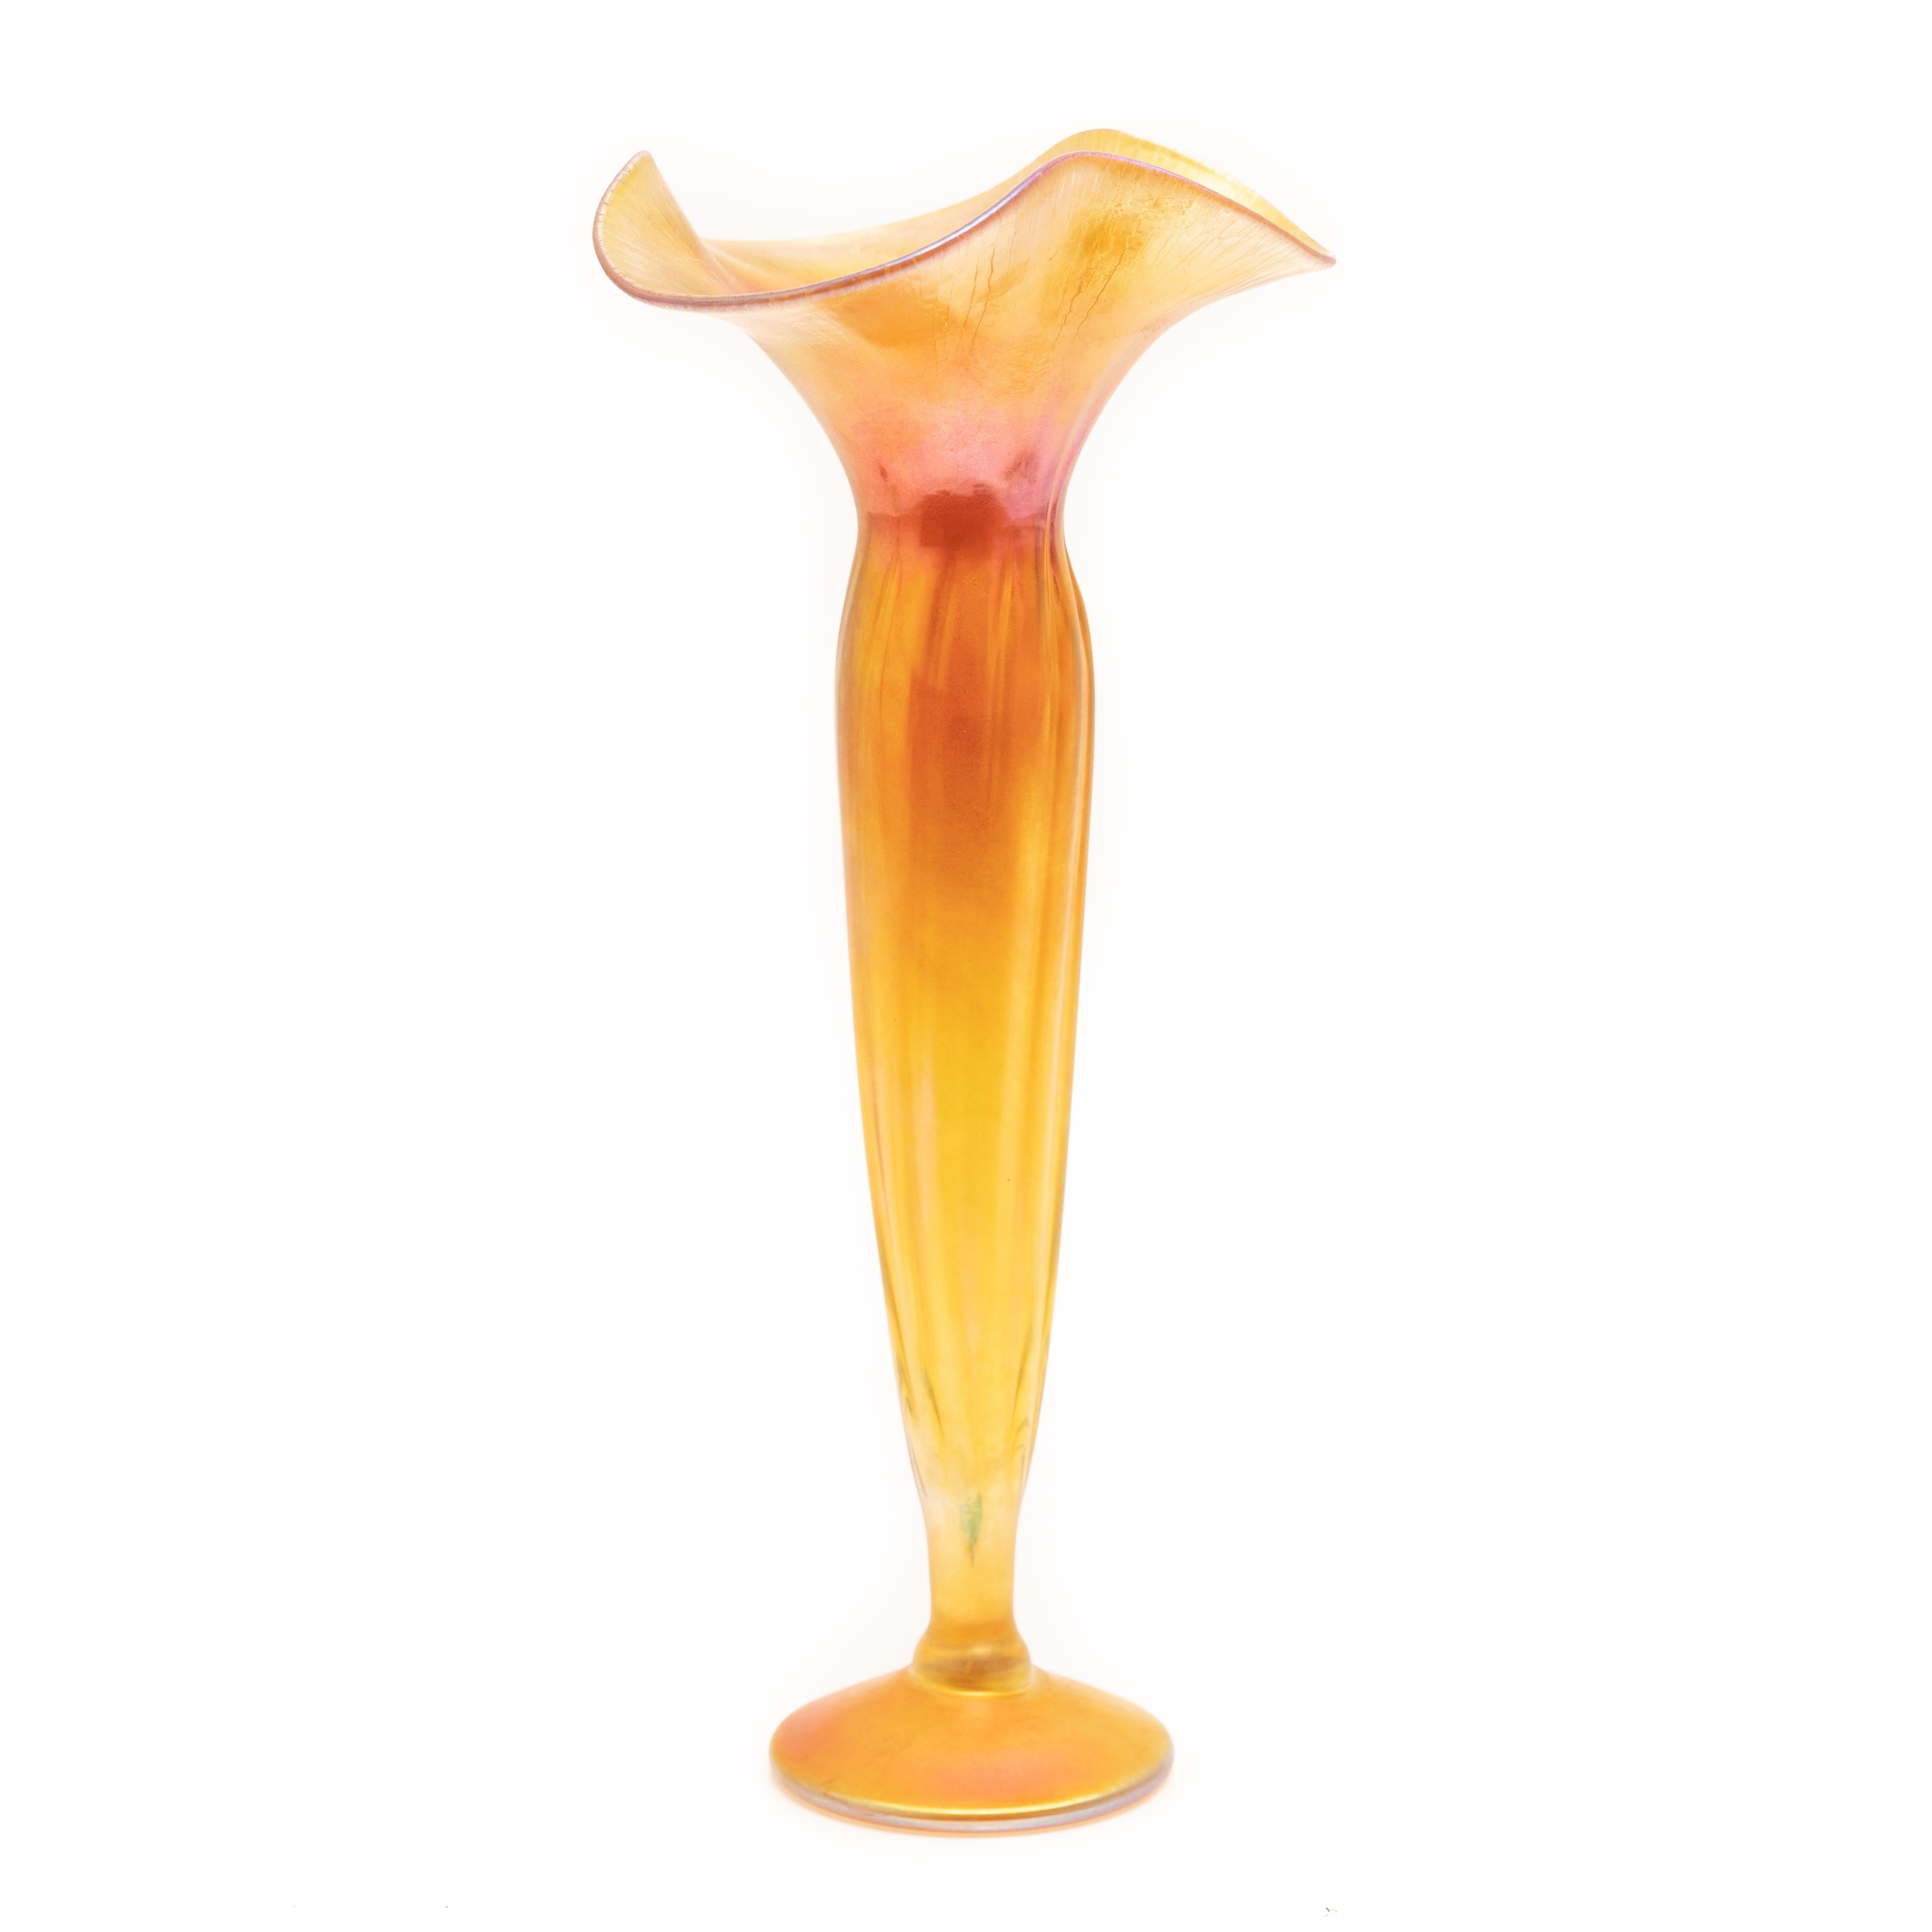 Tiffany Favrile art glass floriform vase, gold iridescent tulip with ruffle rim, marked LCT Favrile m-4914 on bottom, height 13 in.